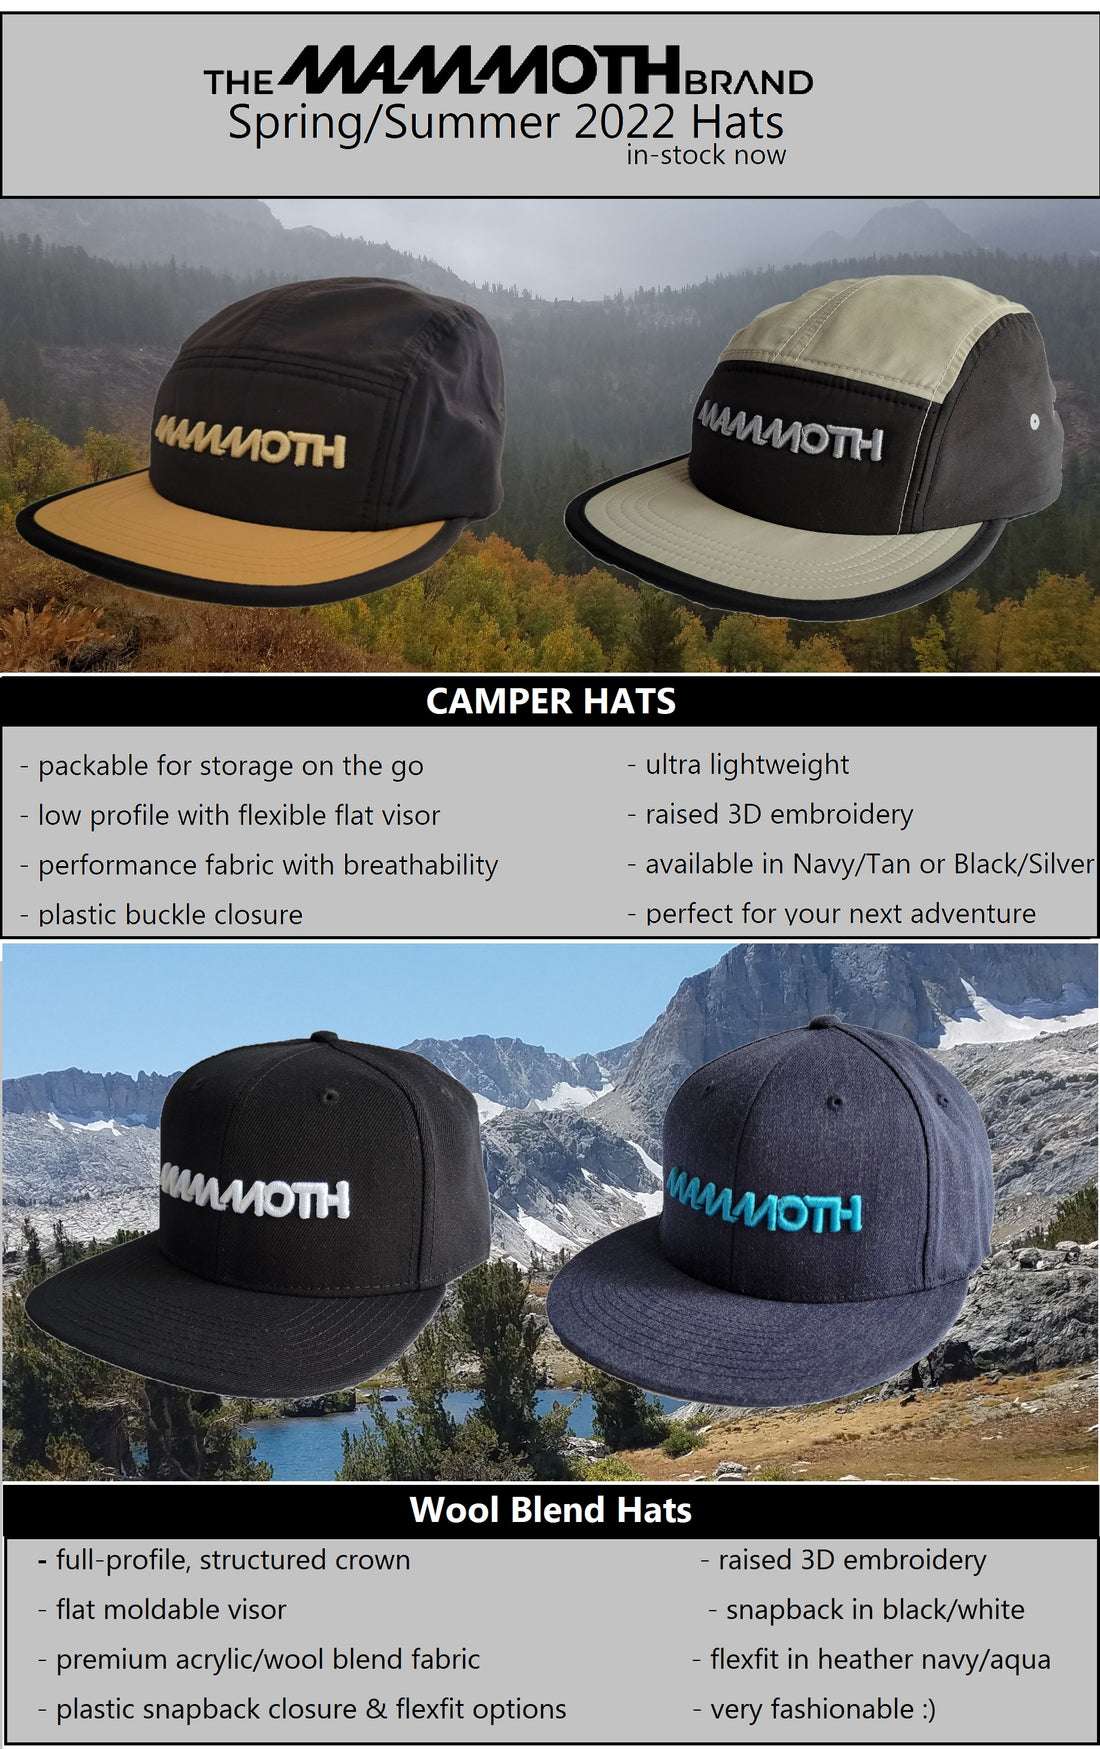 New Summer 2022 Hats In-Stock Now!